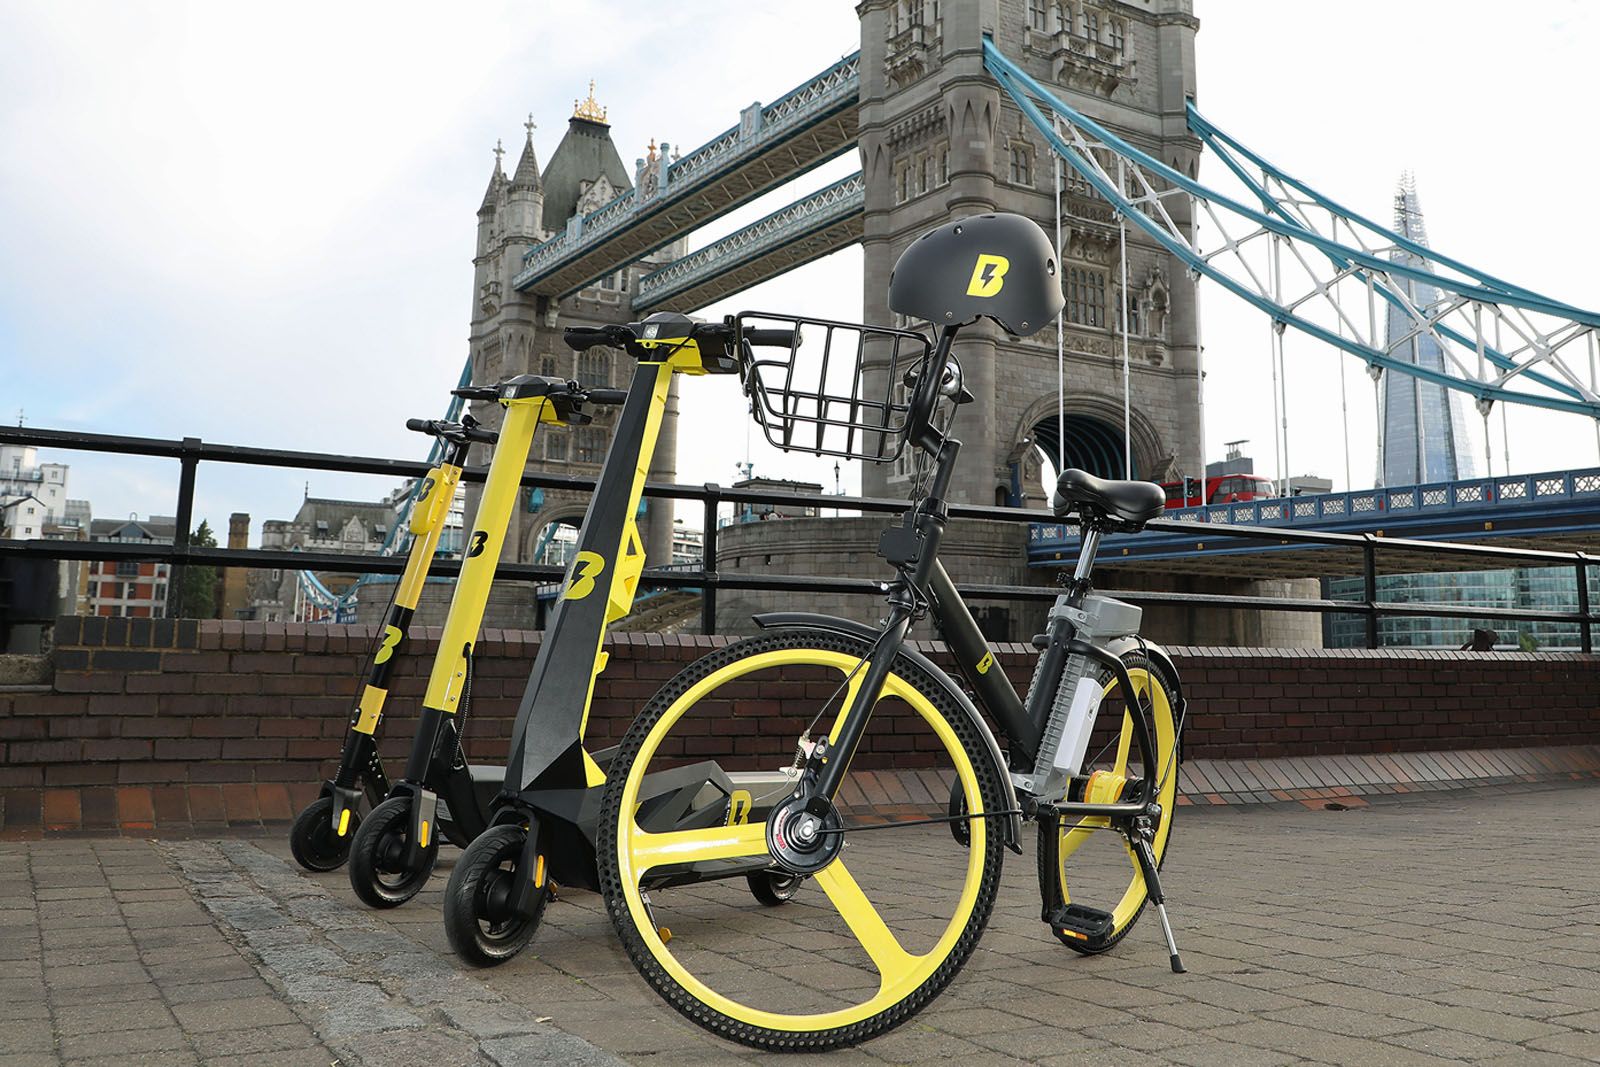 Usain Bolt Is Bringing His Micro Mobility Rental Company To The Uk image 1